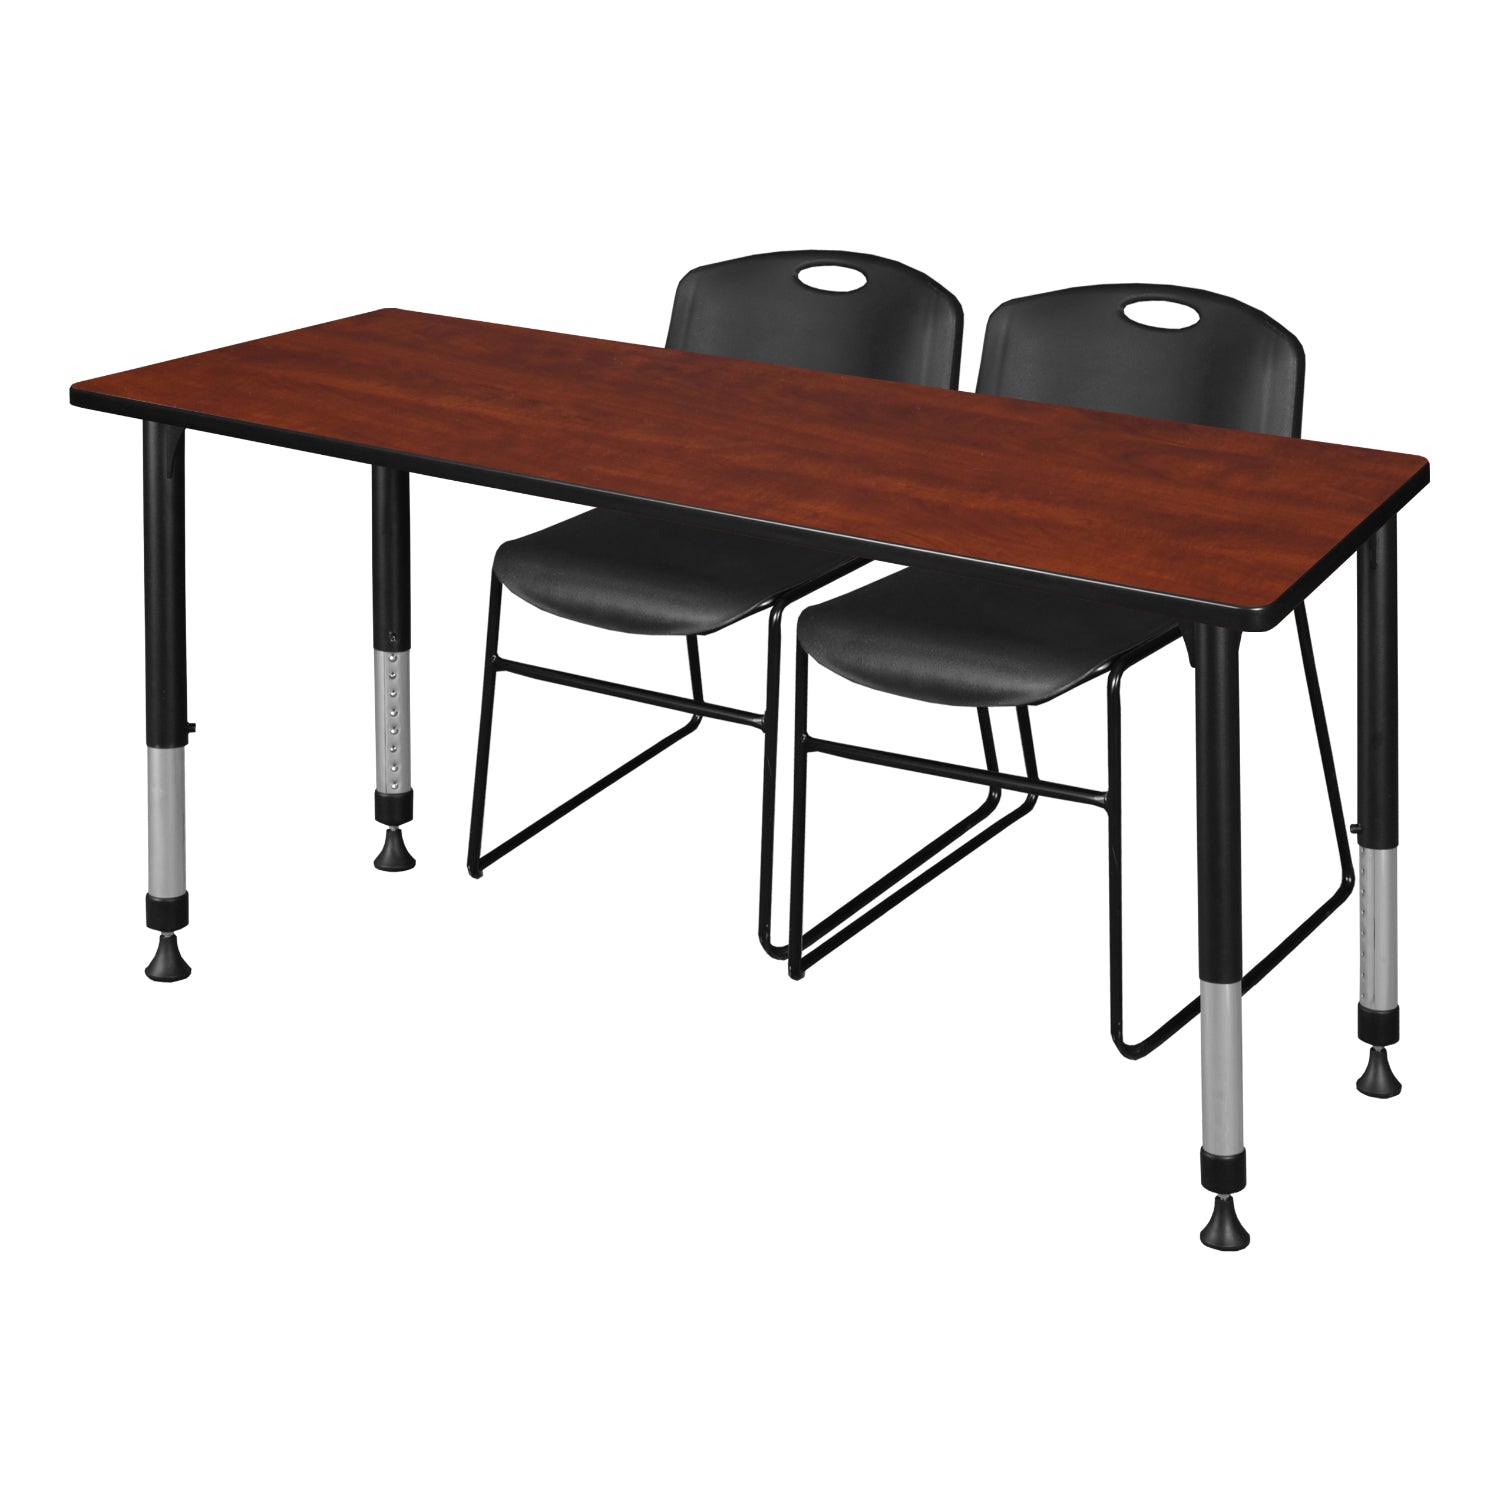 Kee Classroom Table and Chair Package, Kee 72" x 24" Rectangular Adjustable Height Table with 2 Black Zeng Stack Chairs